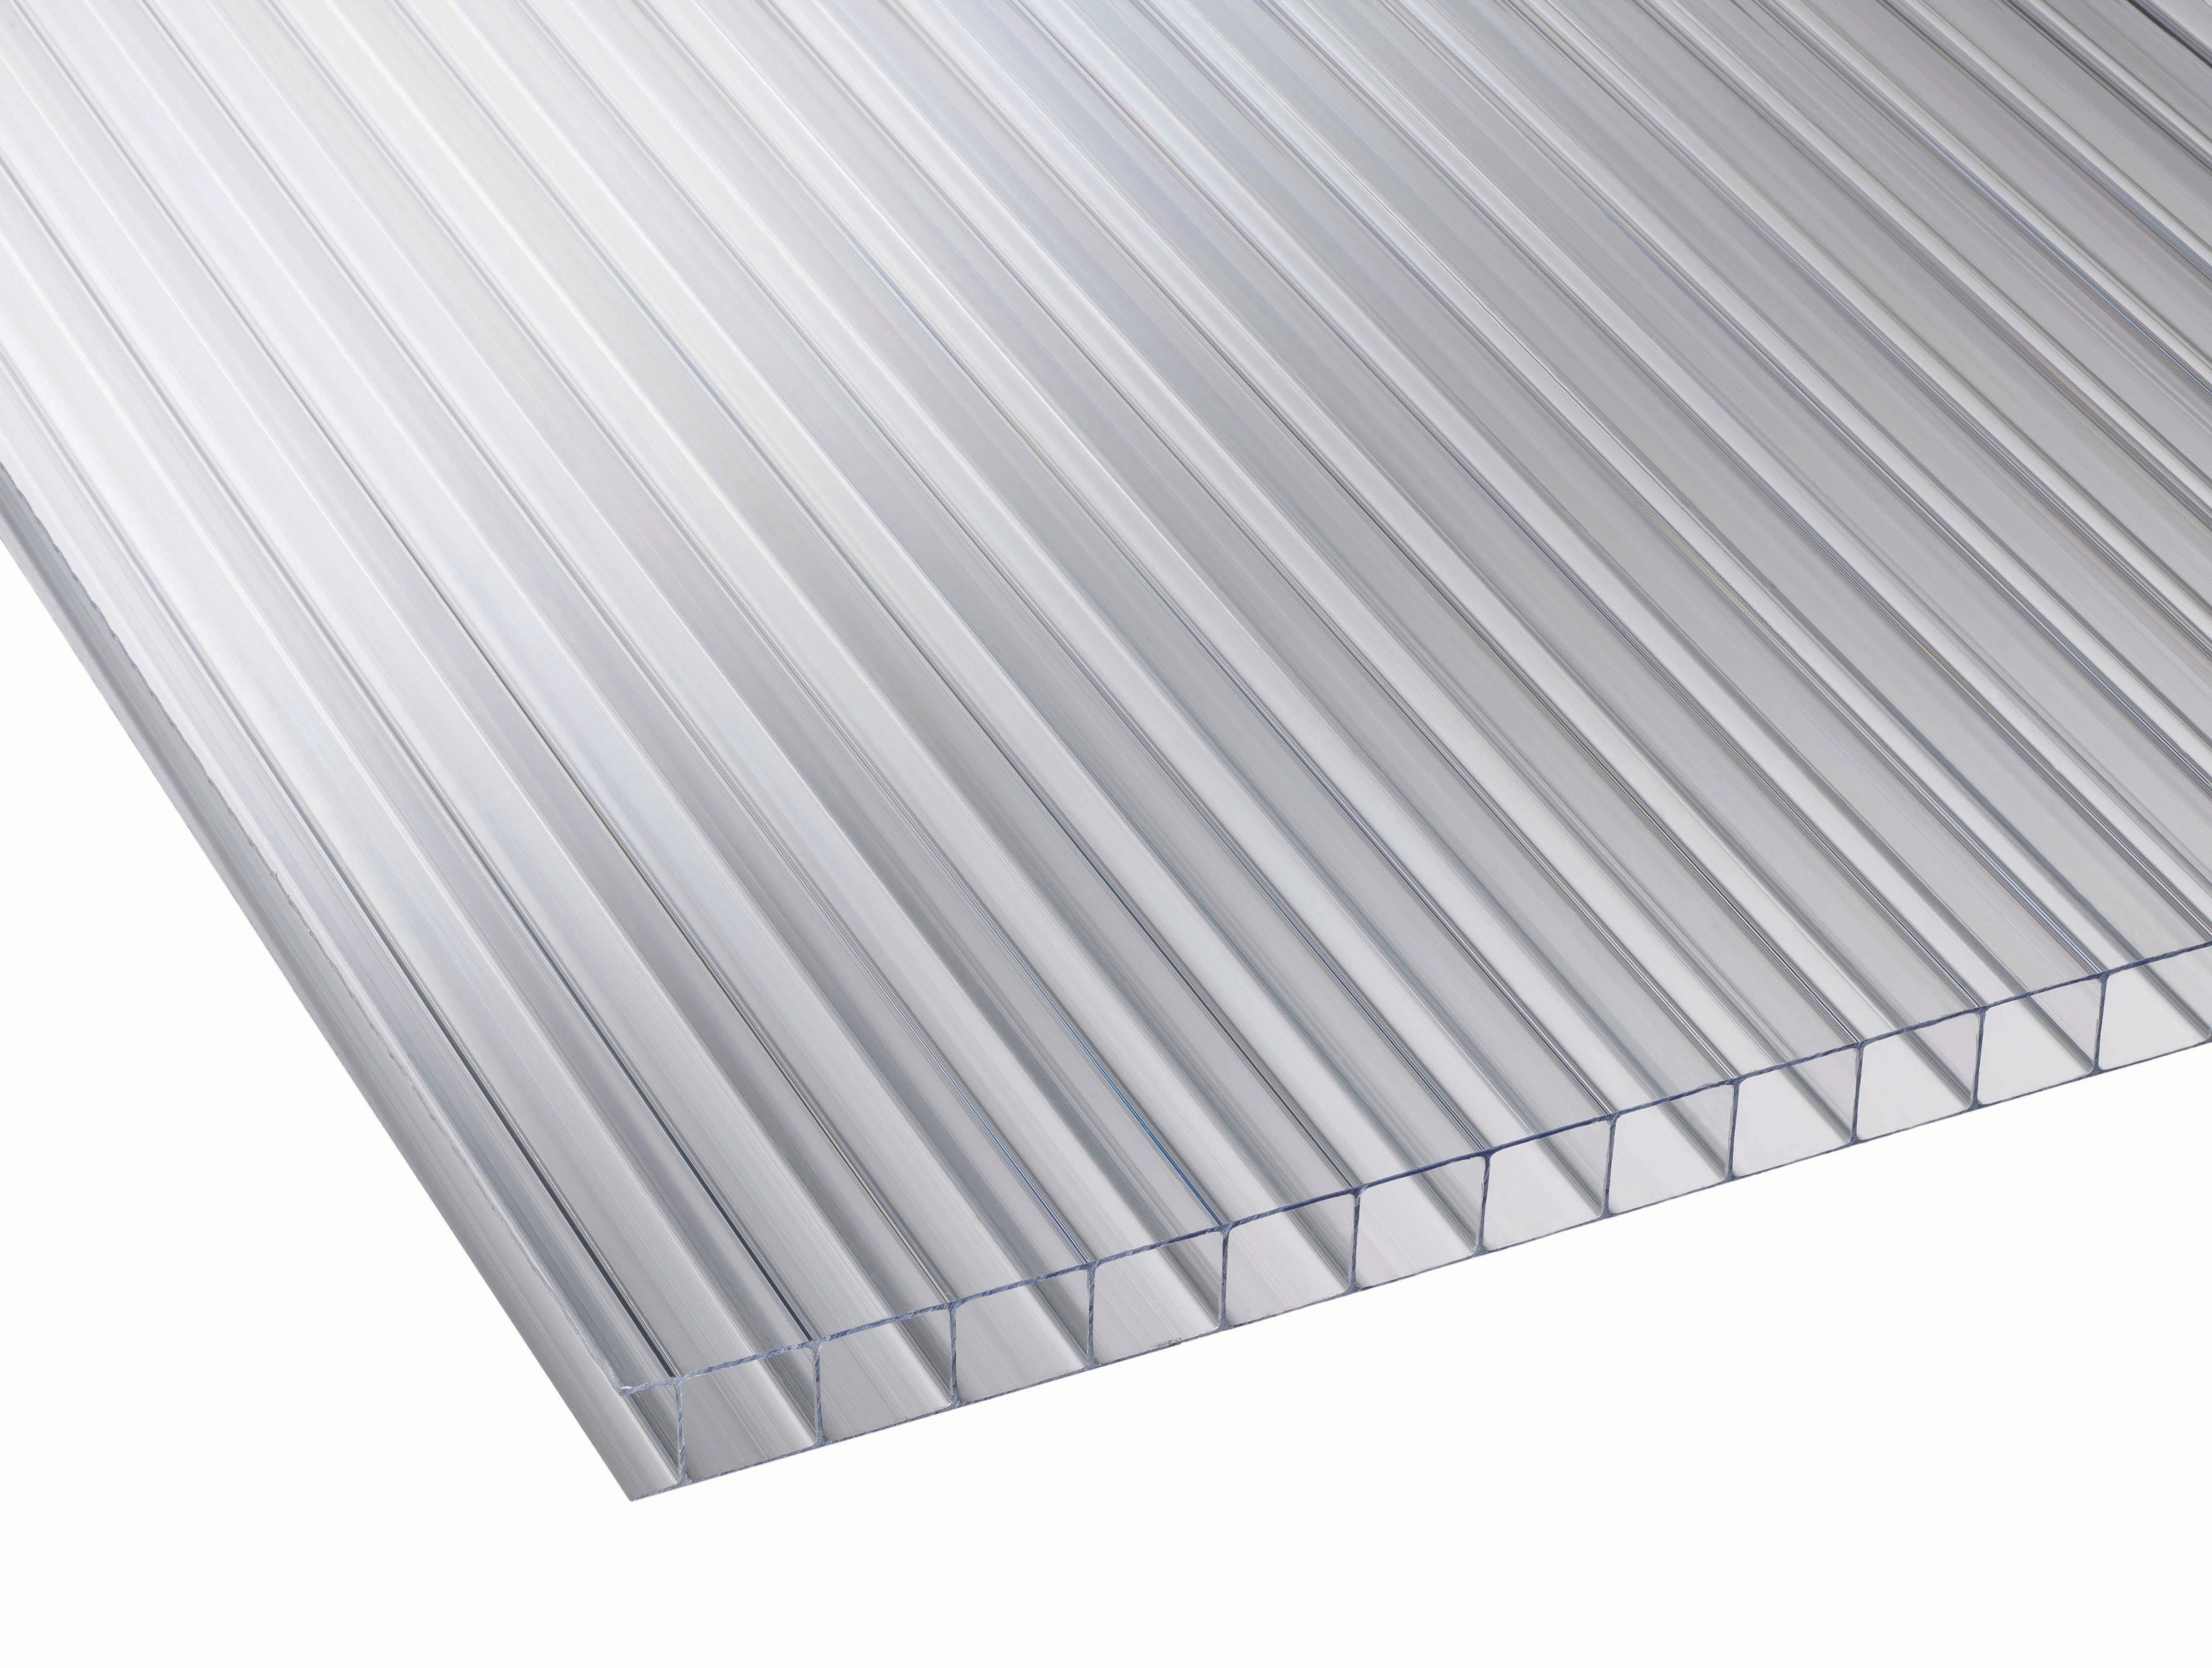 Image of 10mm Clear Multiwall Polycarbonate Sheet - 3000 x 700mm